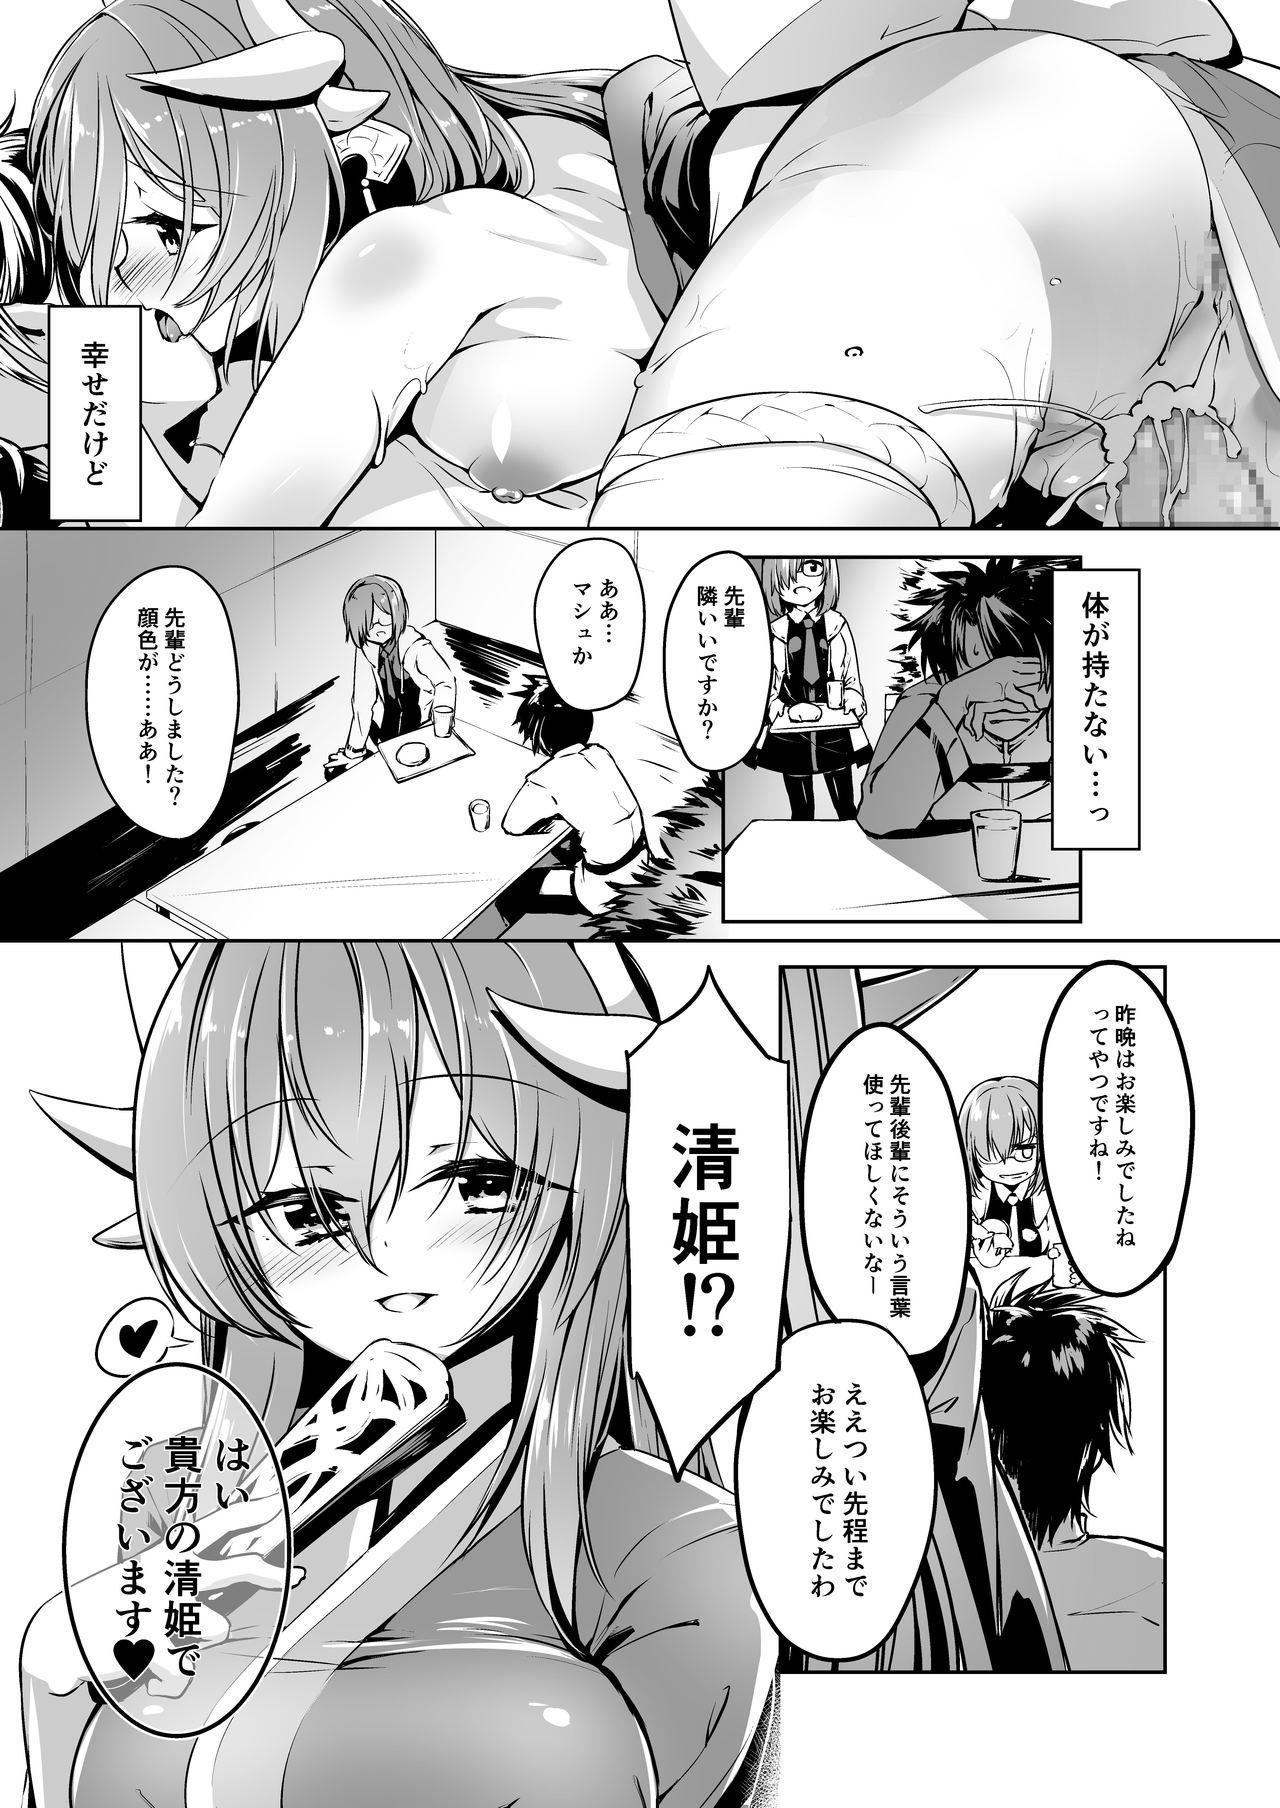 Babe Kiyohime Lovers vol. 02 - Fate grand order Private Sex - Page 6